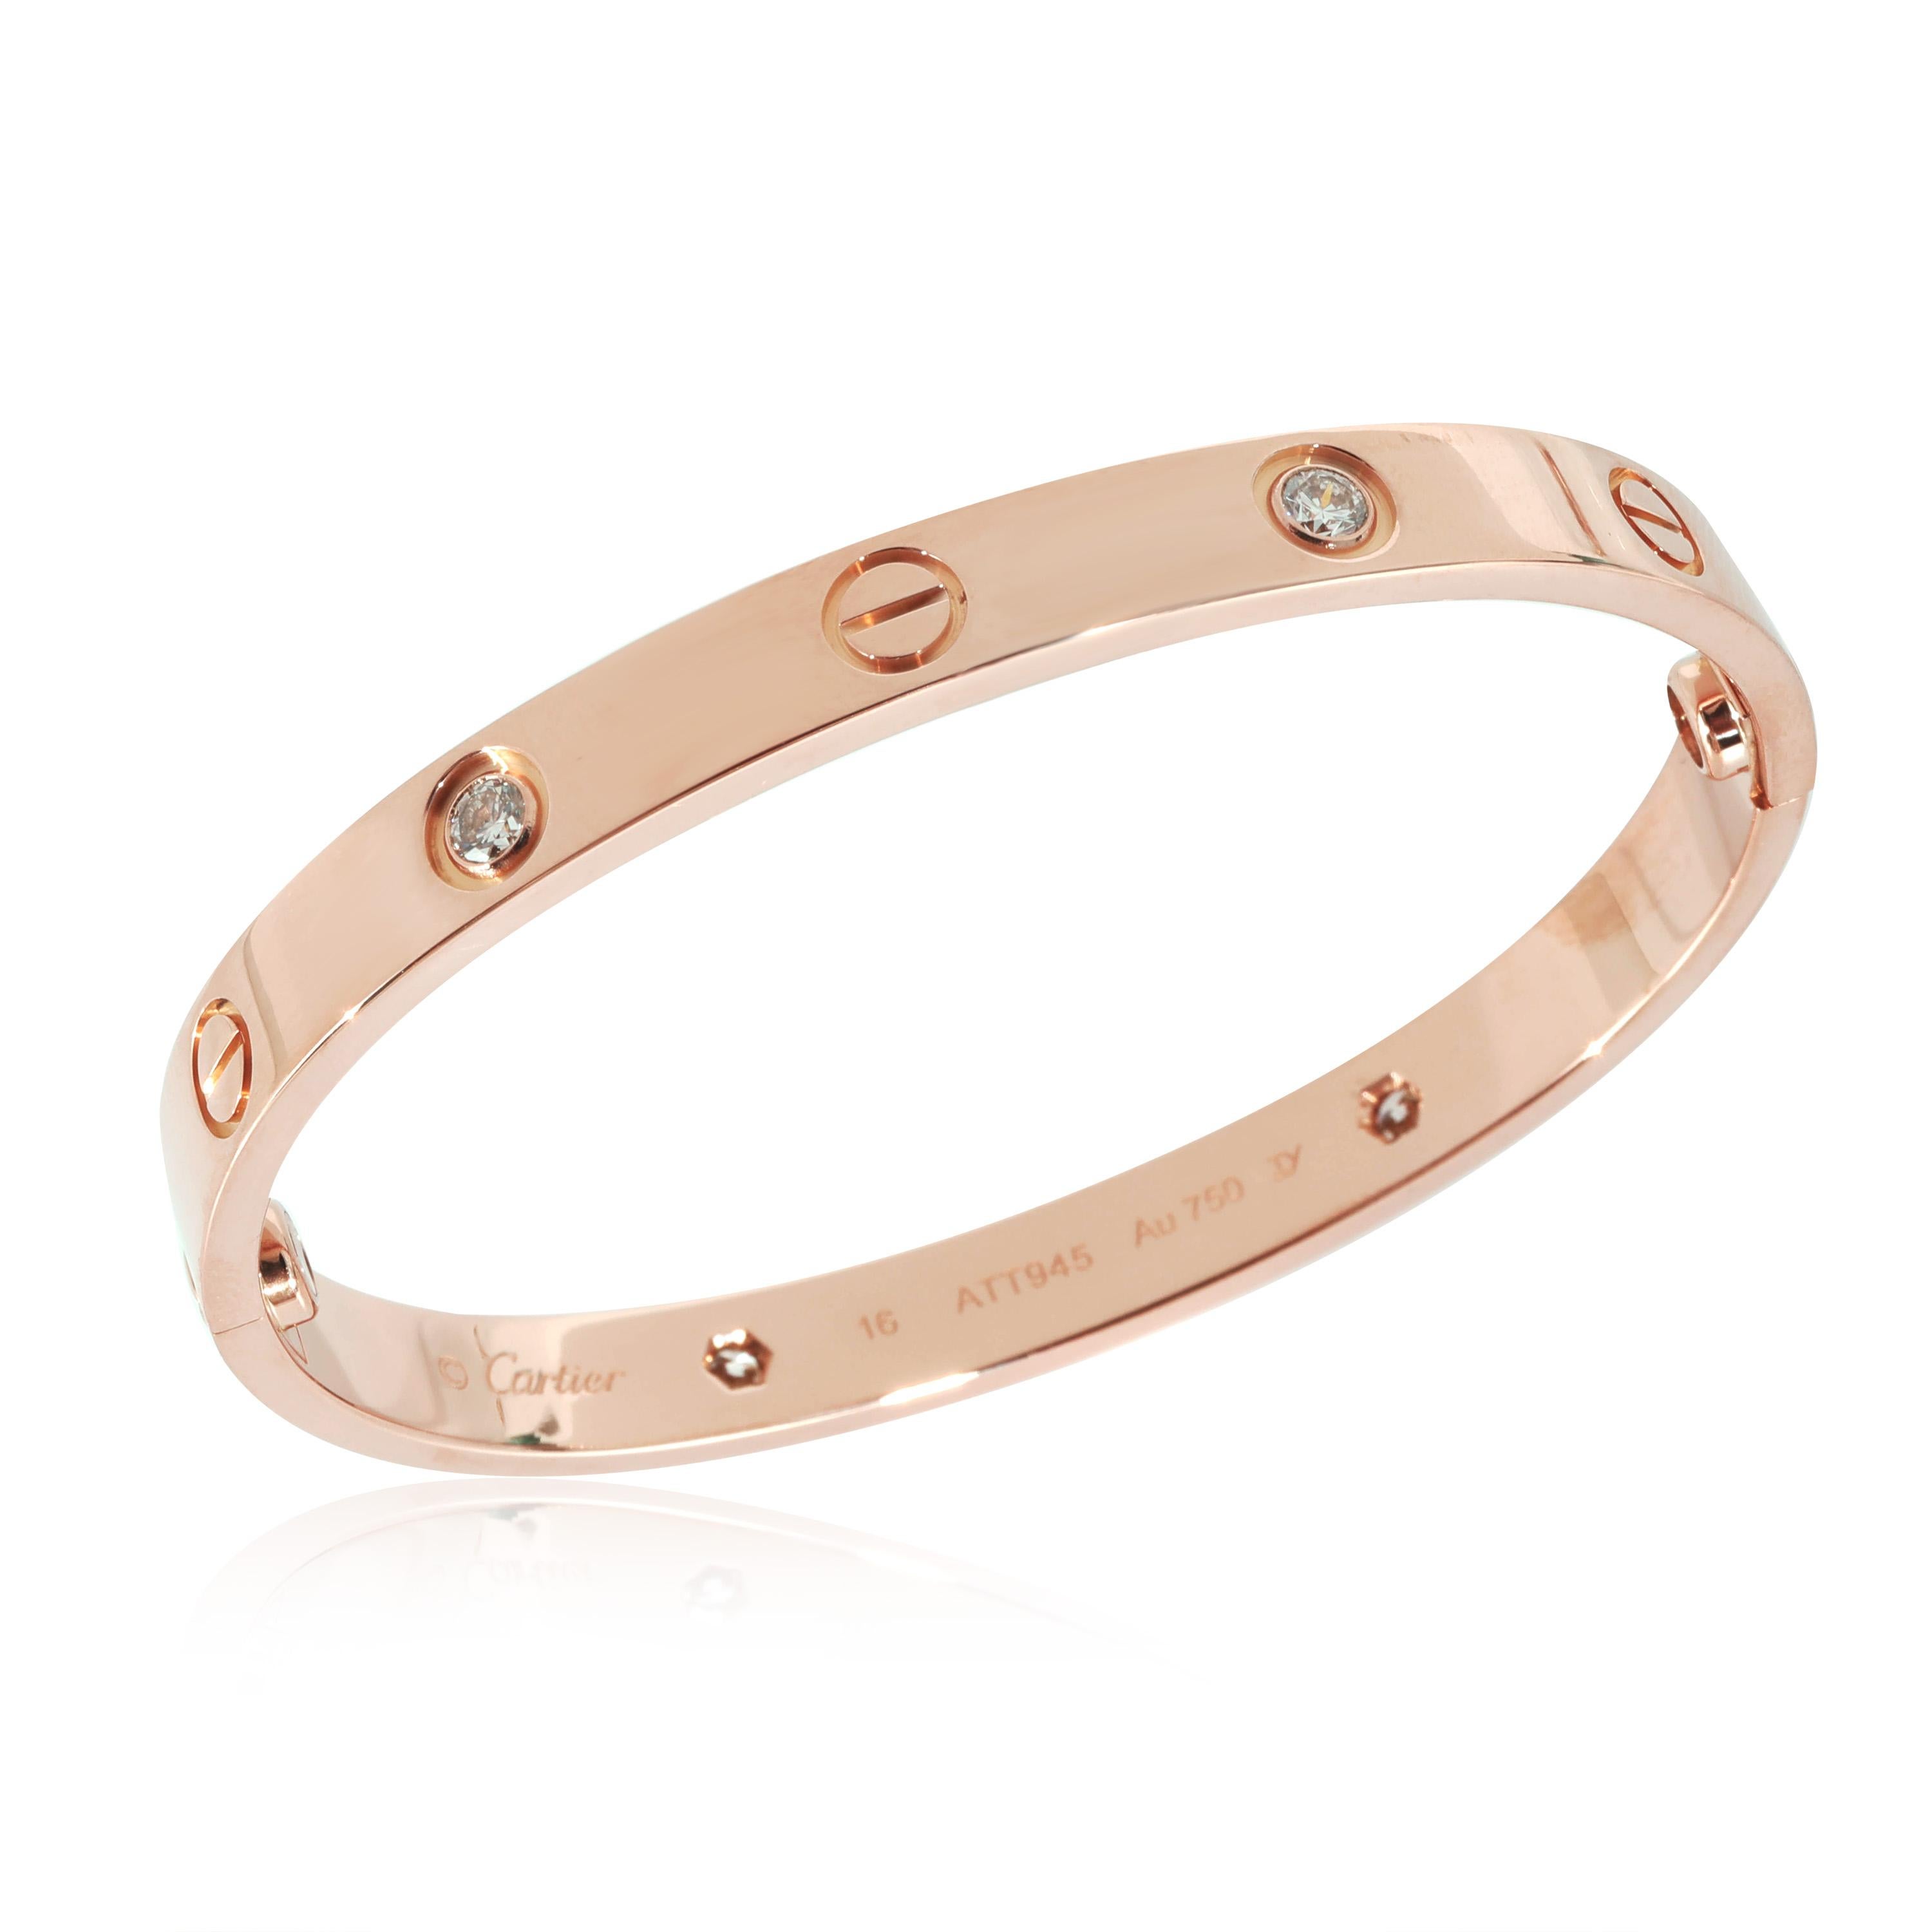 Cartier Love Diamond Bracelet in 18k Rose Gold 0.42 CTW In Excellent Condition For Sale In New York, NY